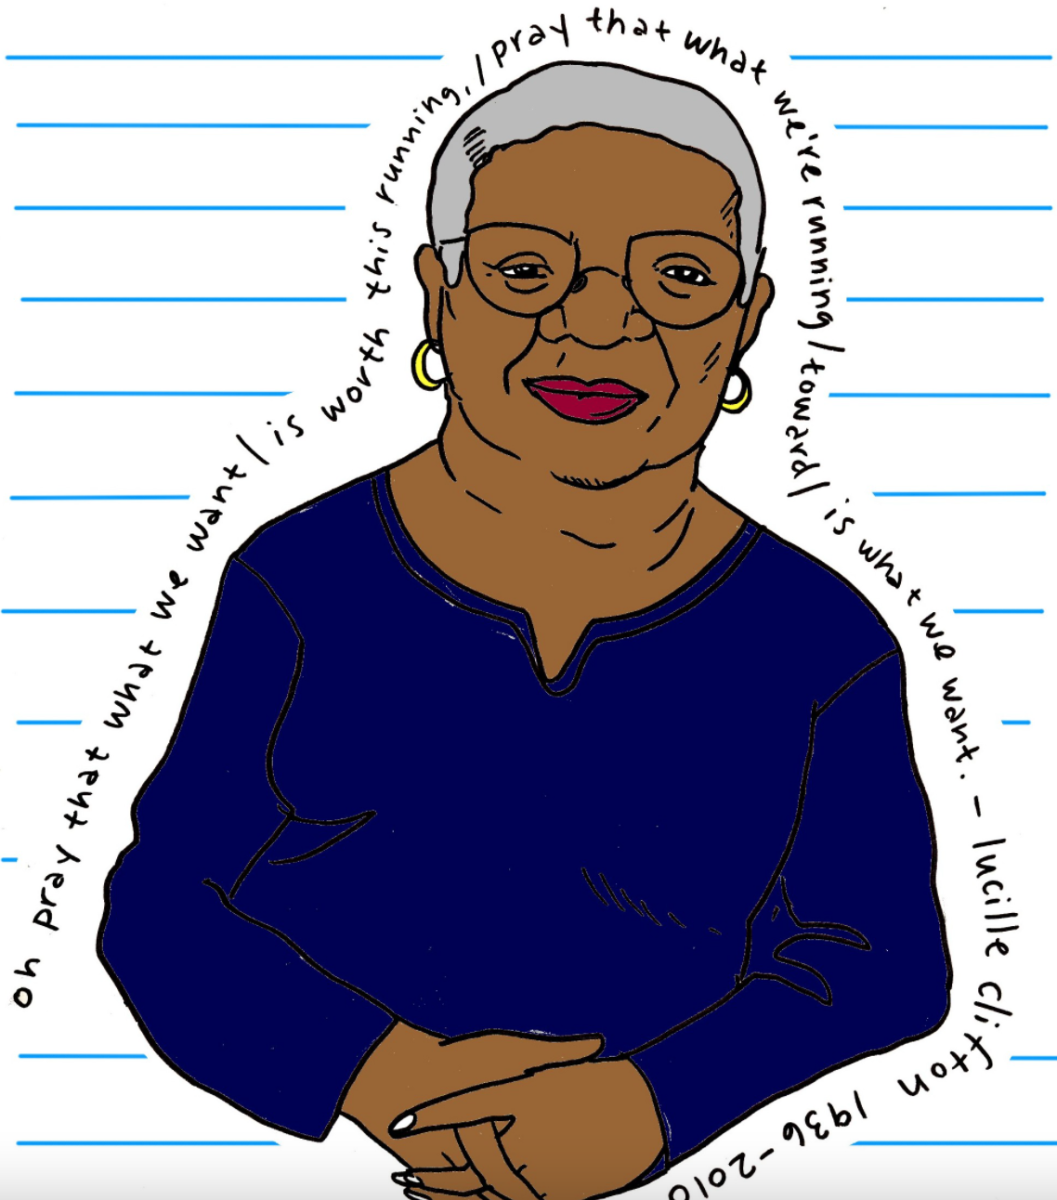 Lucille Clifton's poems are seductively simple on their surfaces. Lurking beneath their veneer of calm and ordinary language are landmines waiting to blow. That is, they conceal great complexity under their still surfaces.